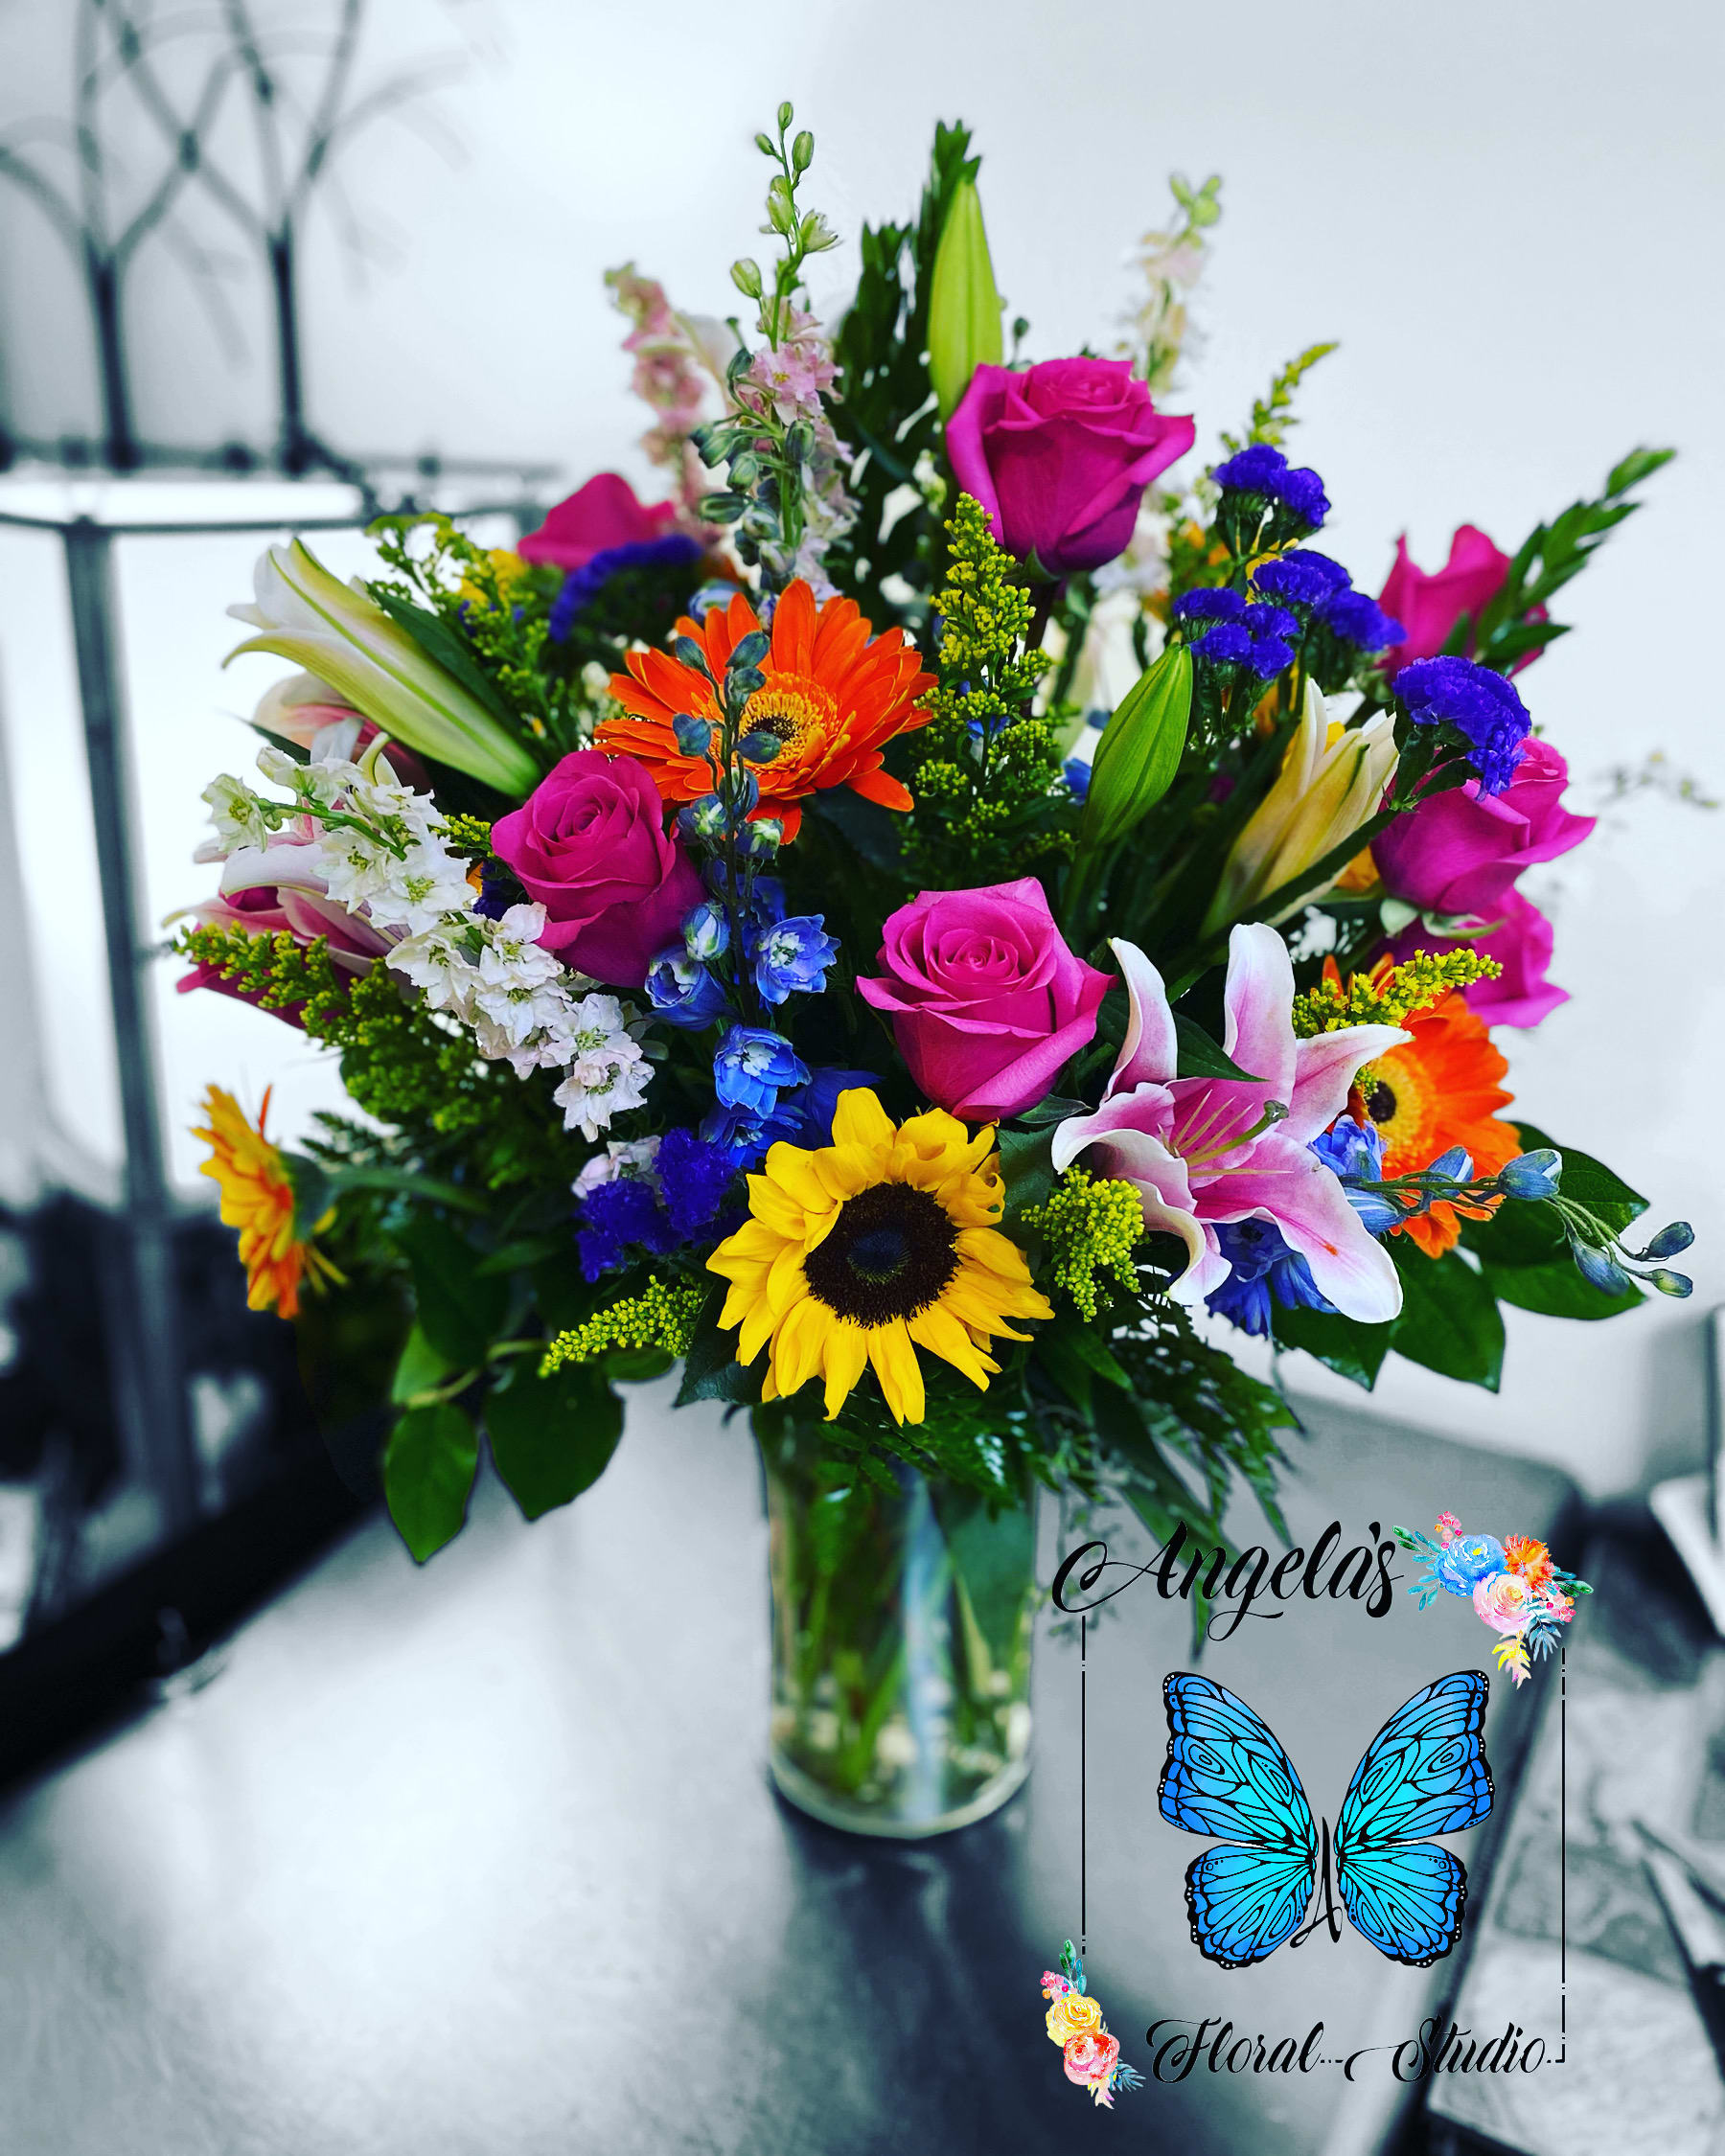 Make Me Happy Bouquet - This Delightful Bouquet will be sure to cheer anyone up! With its vibrant color combination and mixed Floral Variety! Bright tones of hot summer colors are just what they want! This charming bouquet includes roses, lily, sunflowers, gerbera daisy and much more!!